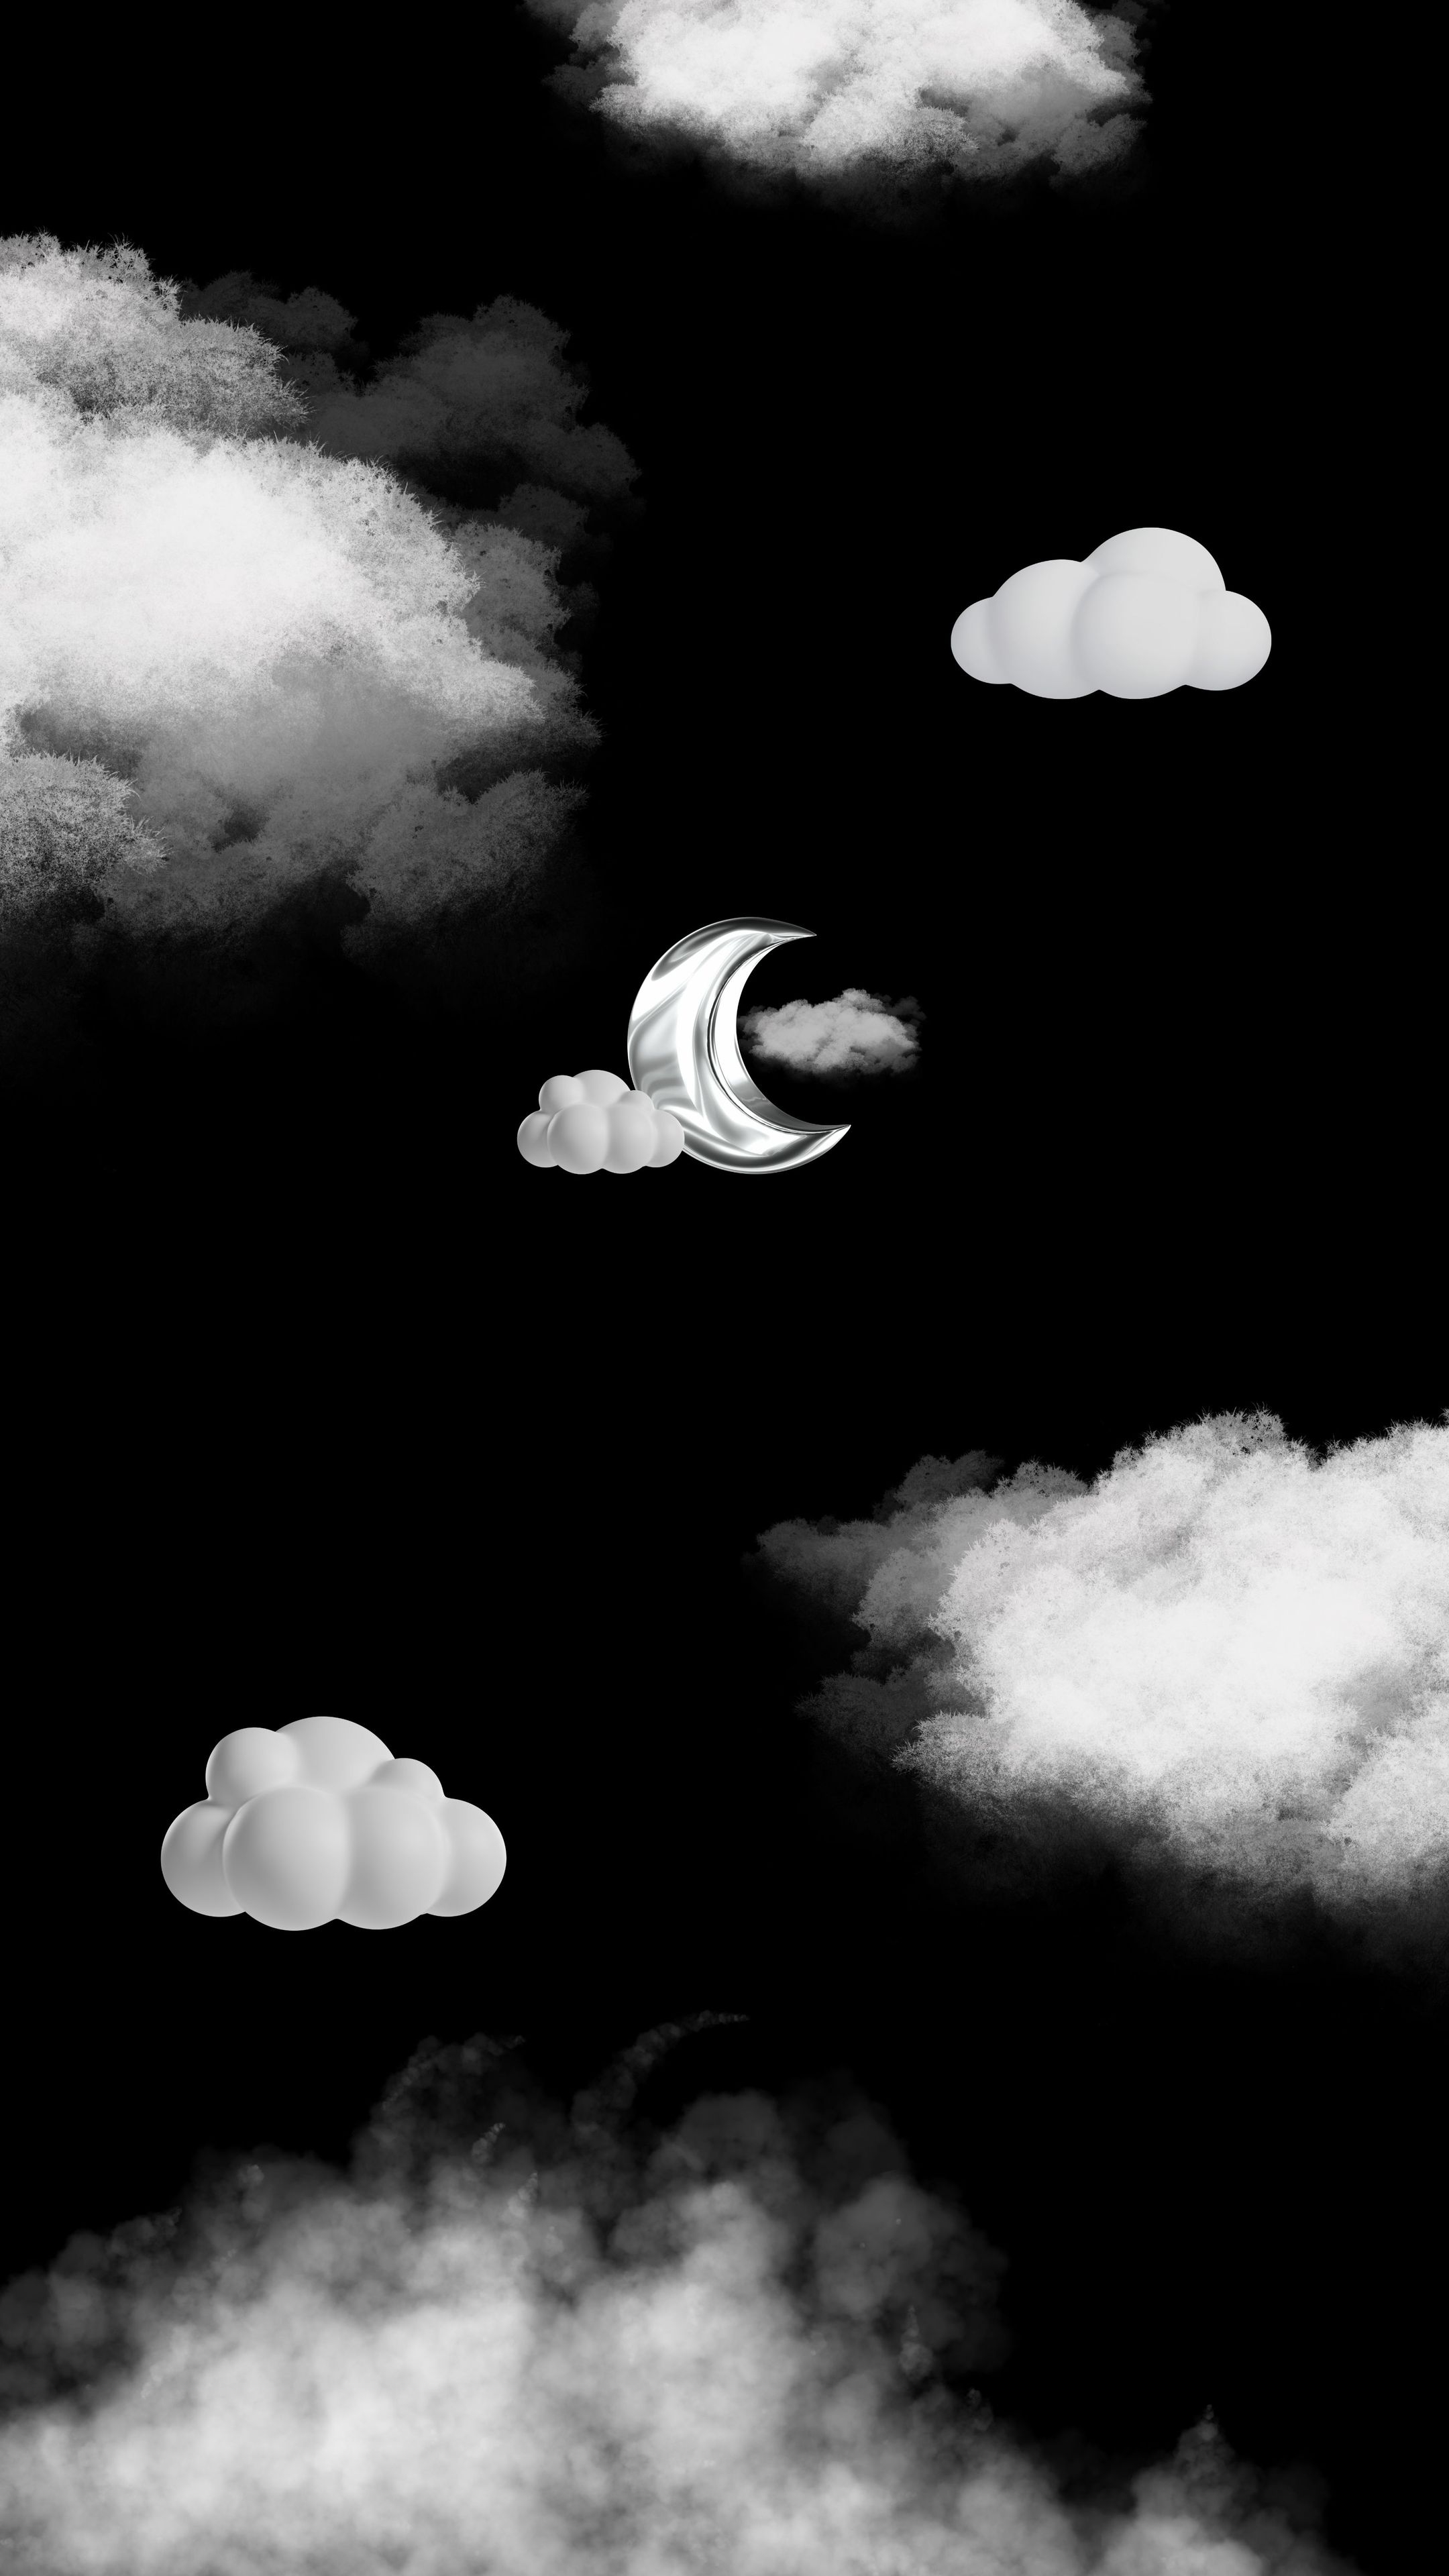 Dreamy Night Sky with Moon and Clouds Wallpaper[7bf29b10e3cc452680c9]